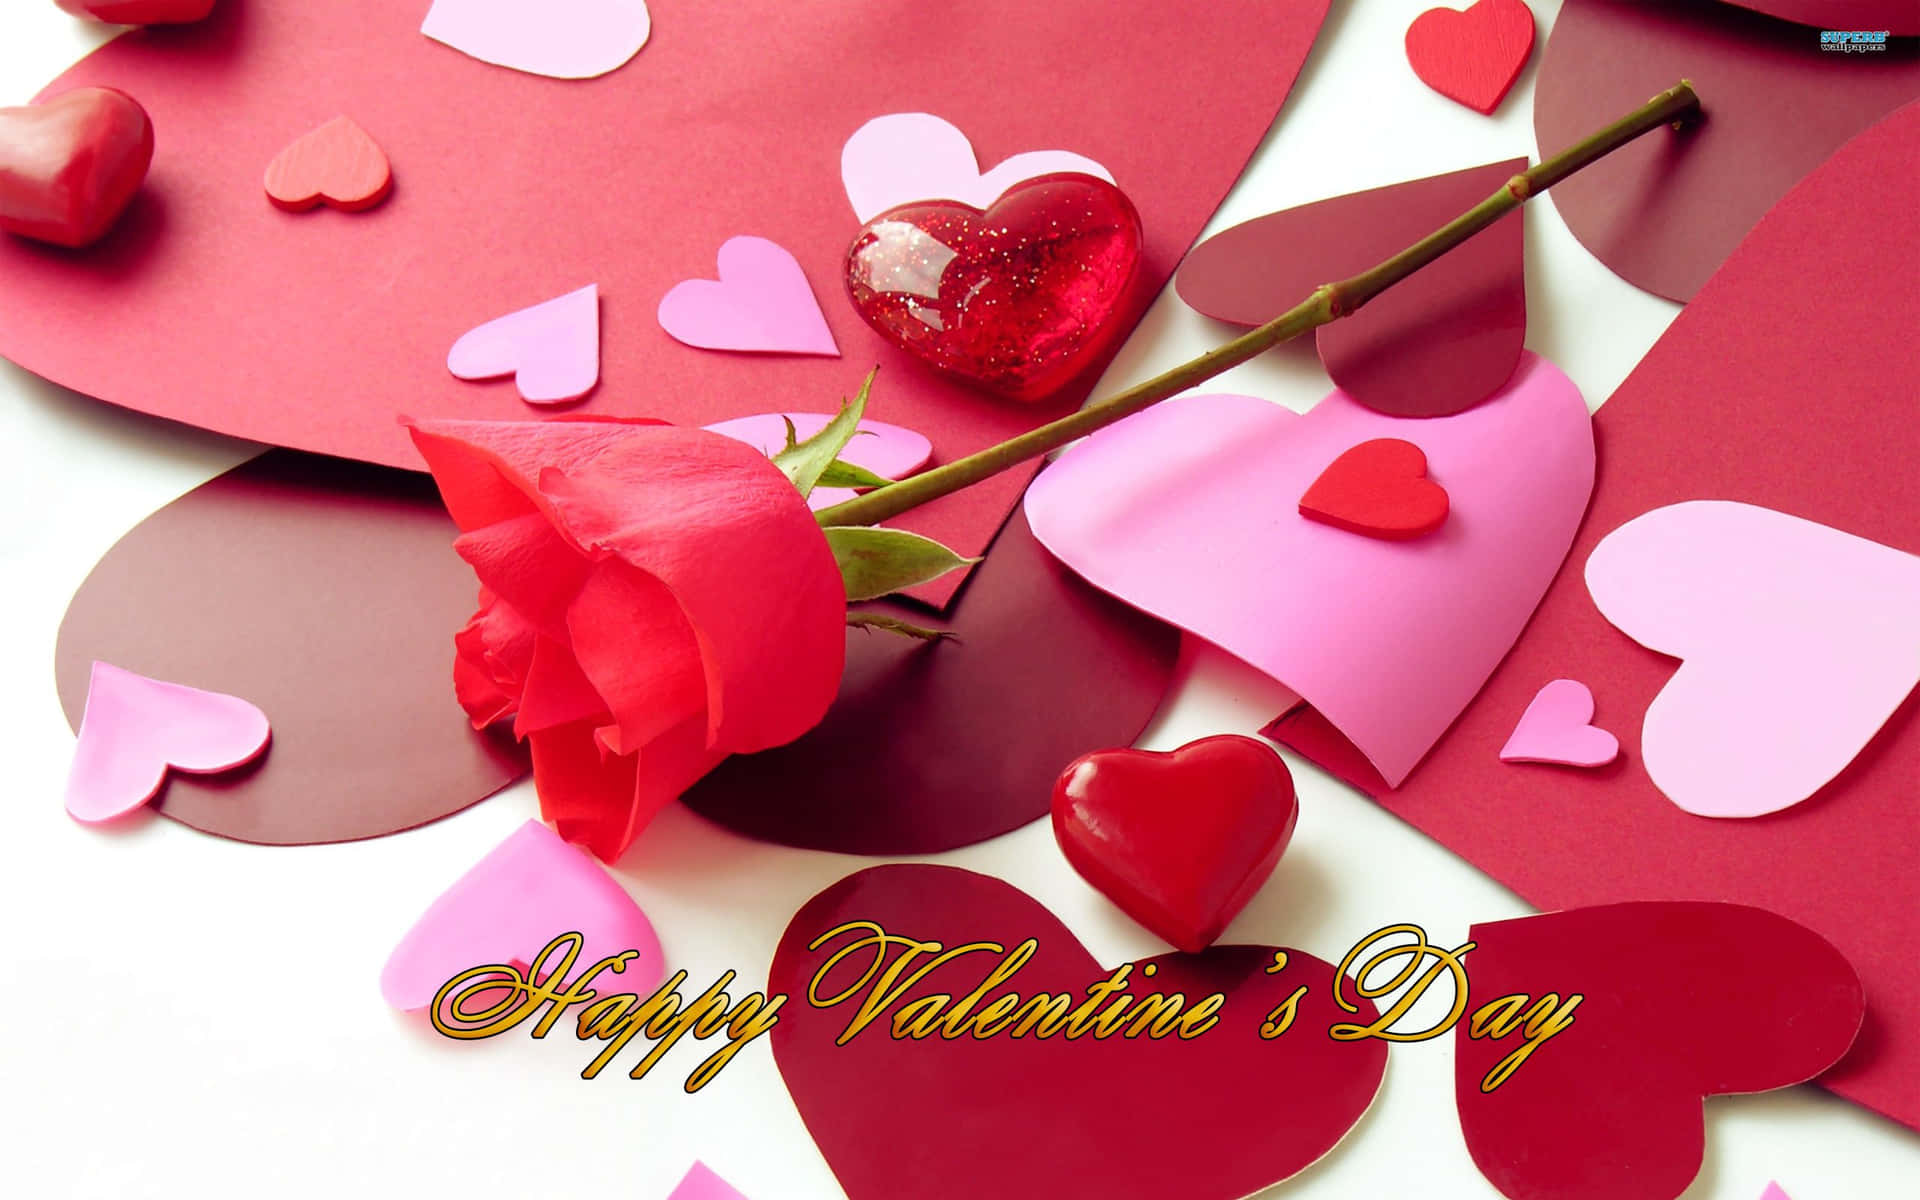 Showing love and appreciation for your loved ones this Valentines Day!